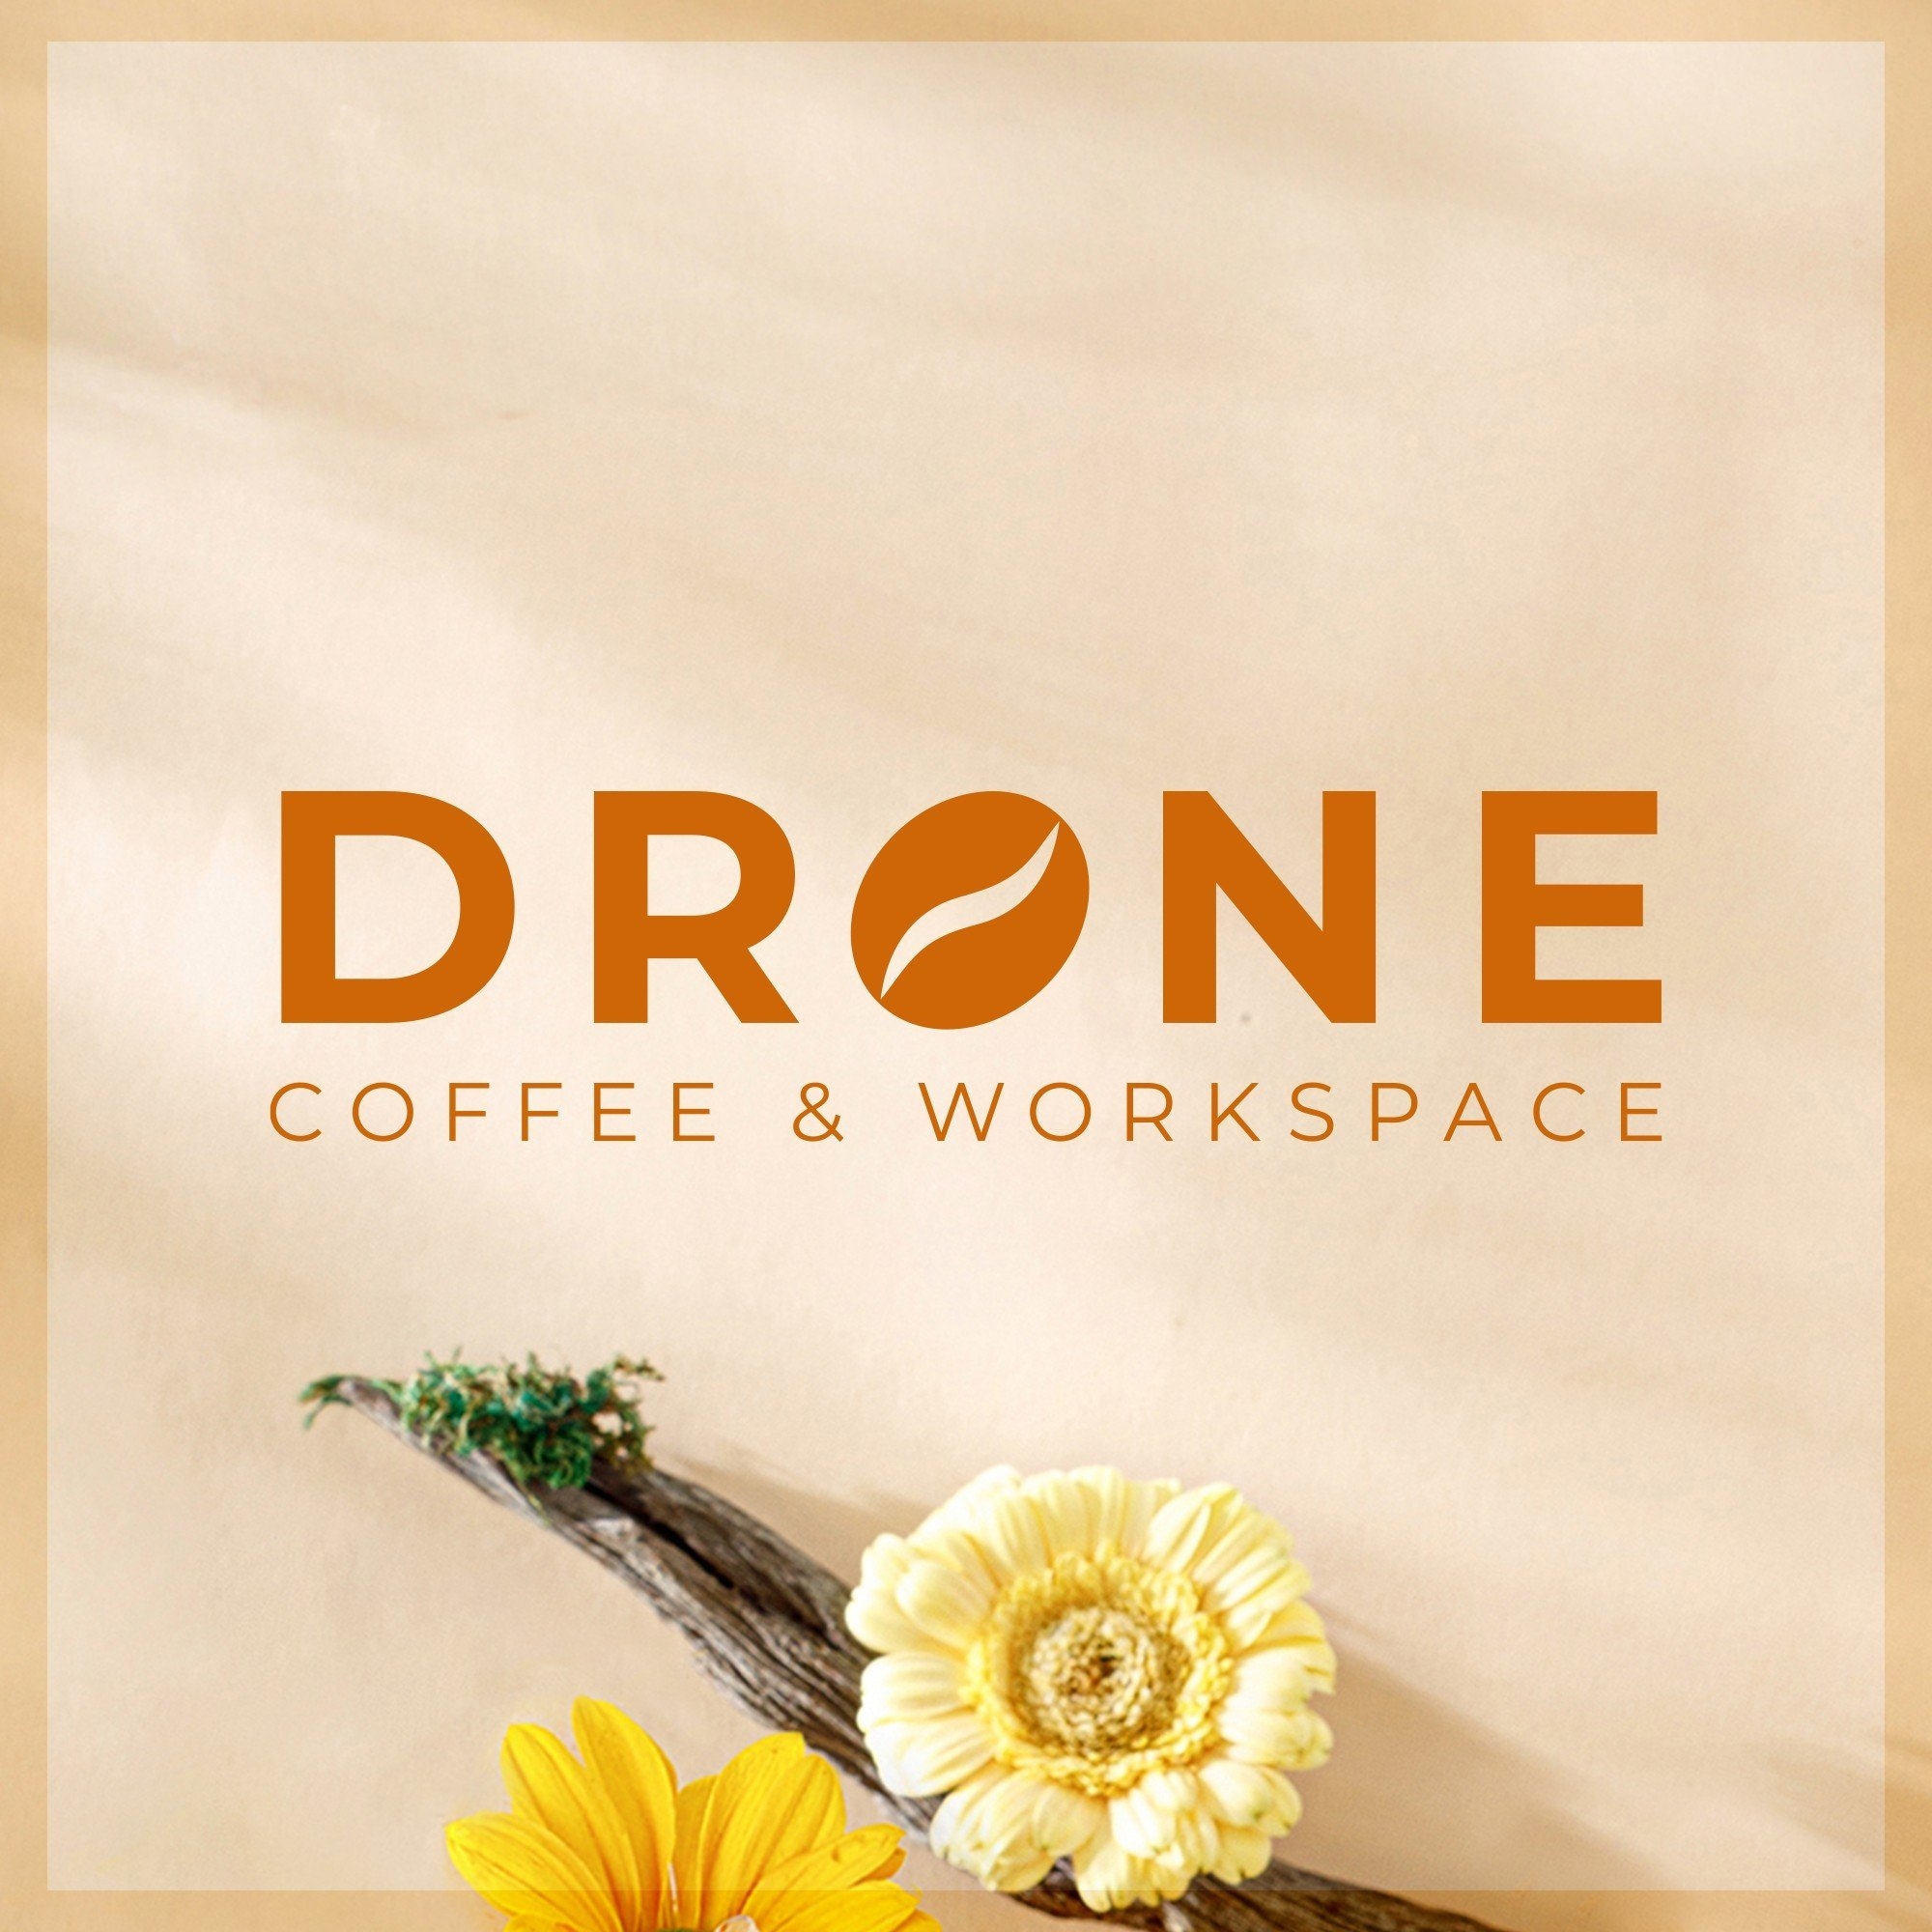 Drone Coffee & Workspace